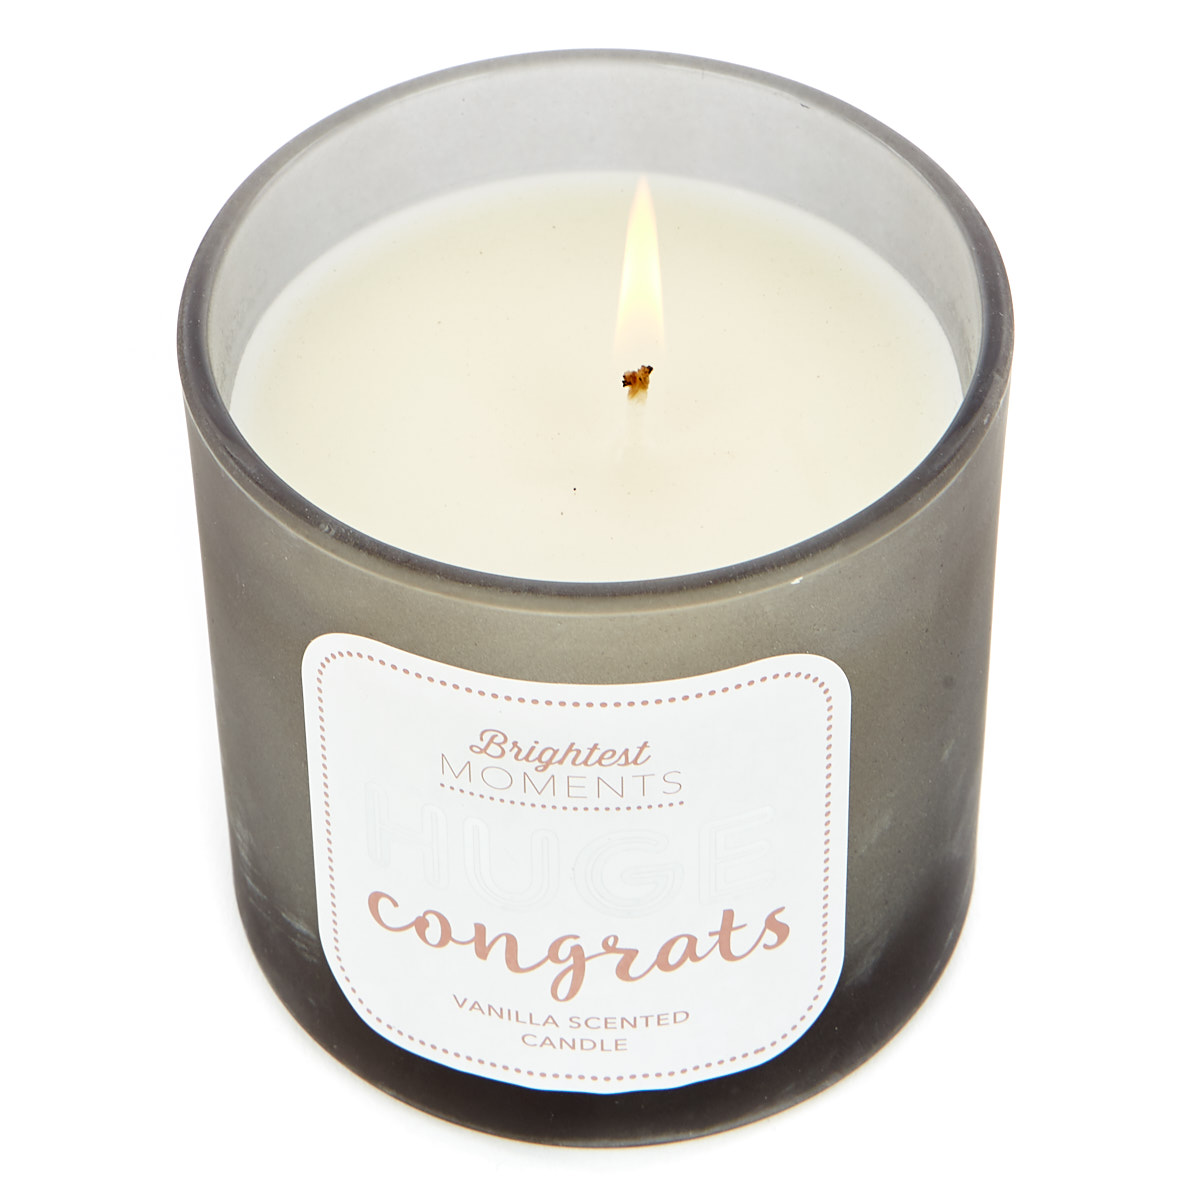 Brightest Moments Vanilla Scented Celebration Candle - Huge Congrats